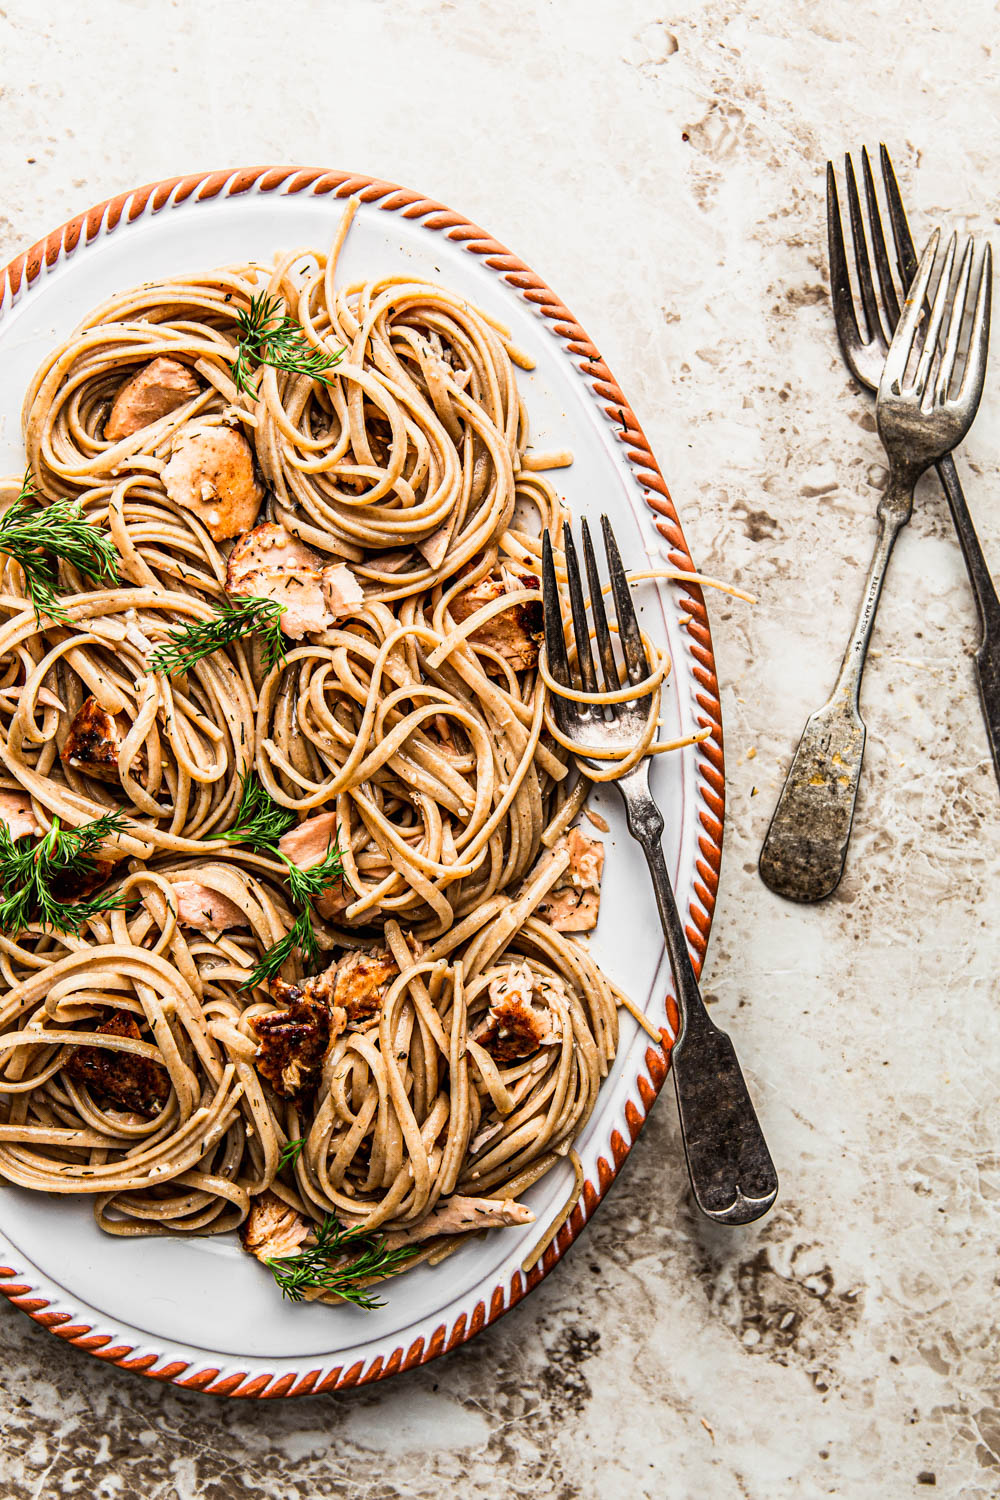 Linguine Pasta with salmon and dill on and oval platter food styling 